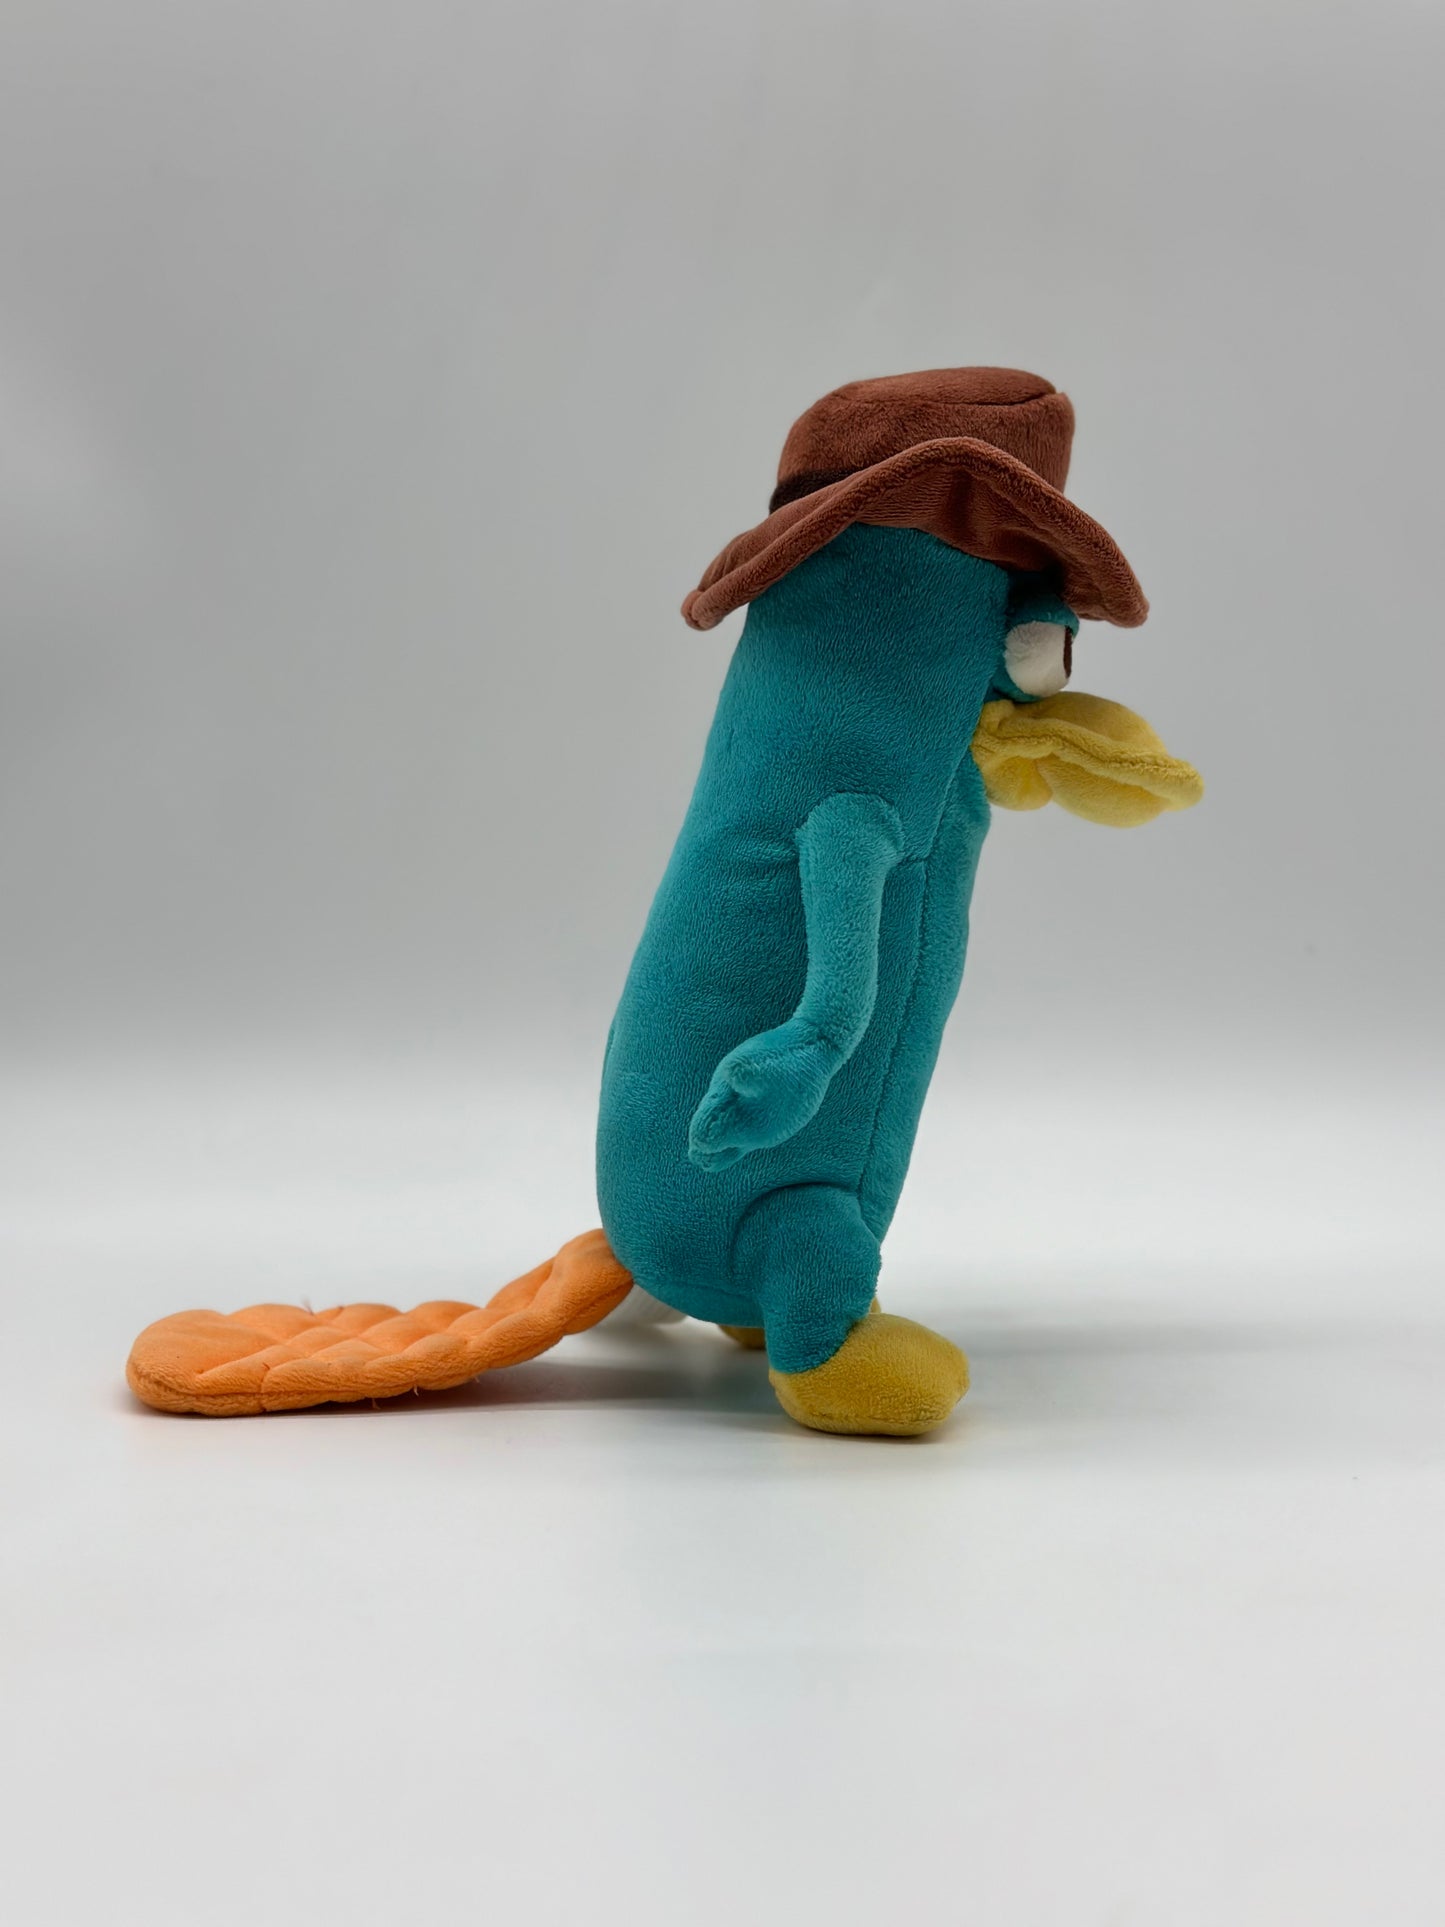 Agent Perry Platypus Plush Small